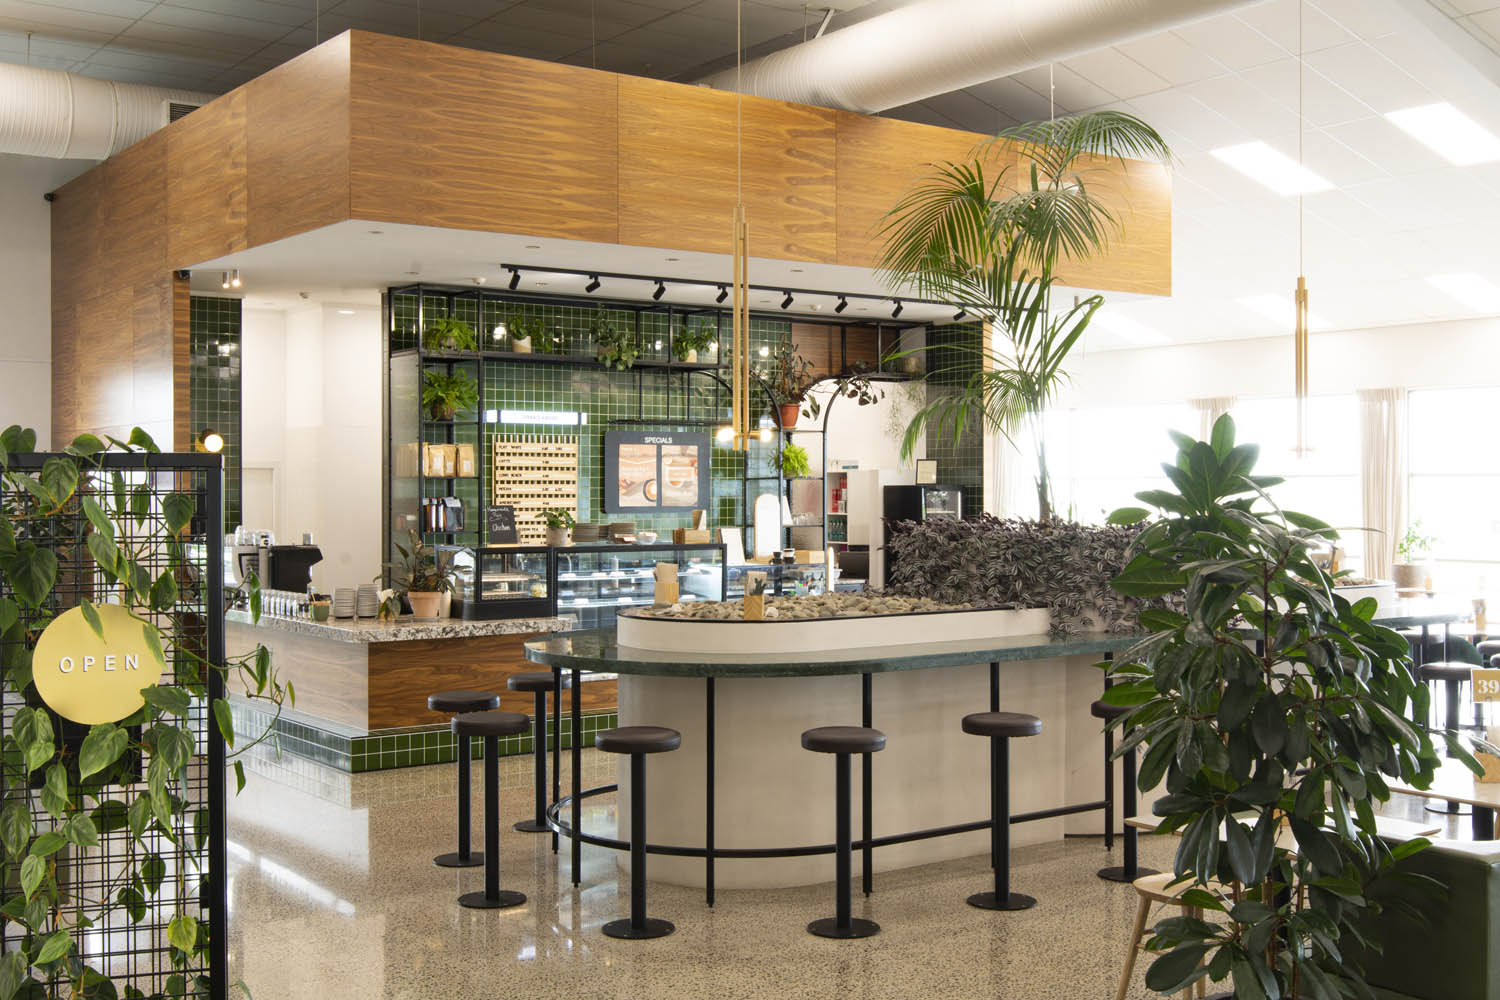 Terrace Airside Rotorua Cafe Fitout by Redwood Joinery